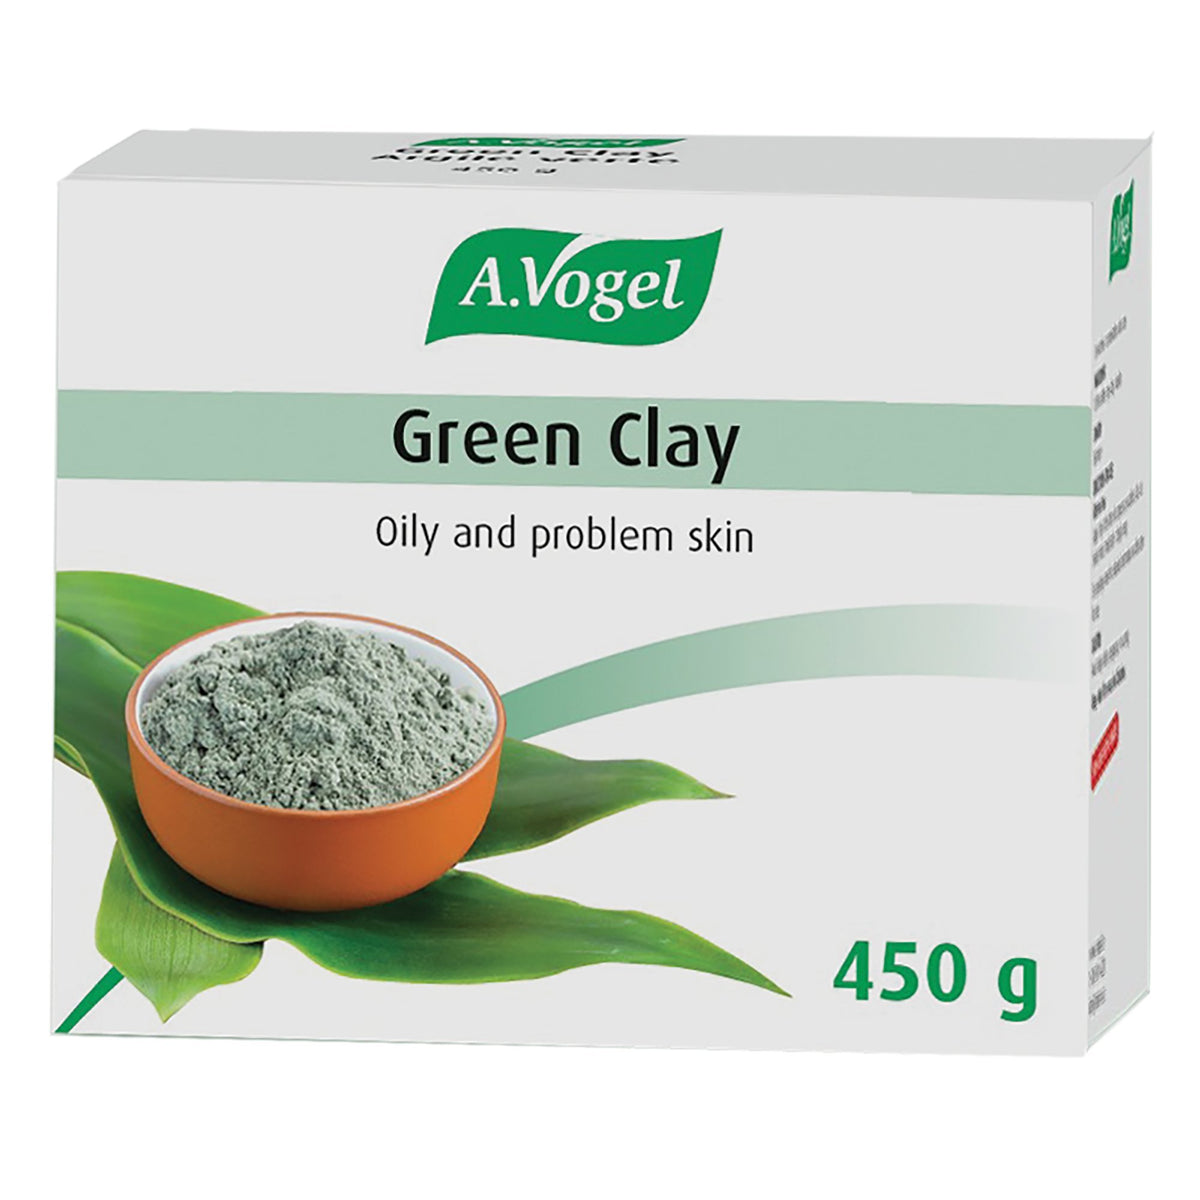 Green Clay - Used for clay mask, green clay is ideal for oily and problem skin - A.Vogel Canada